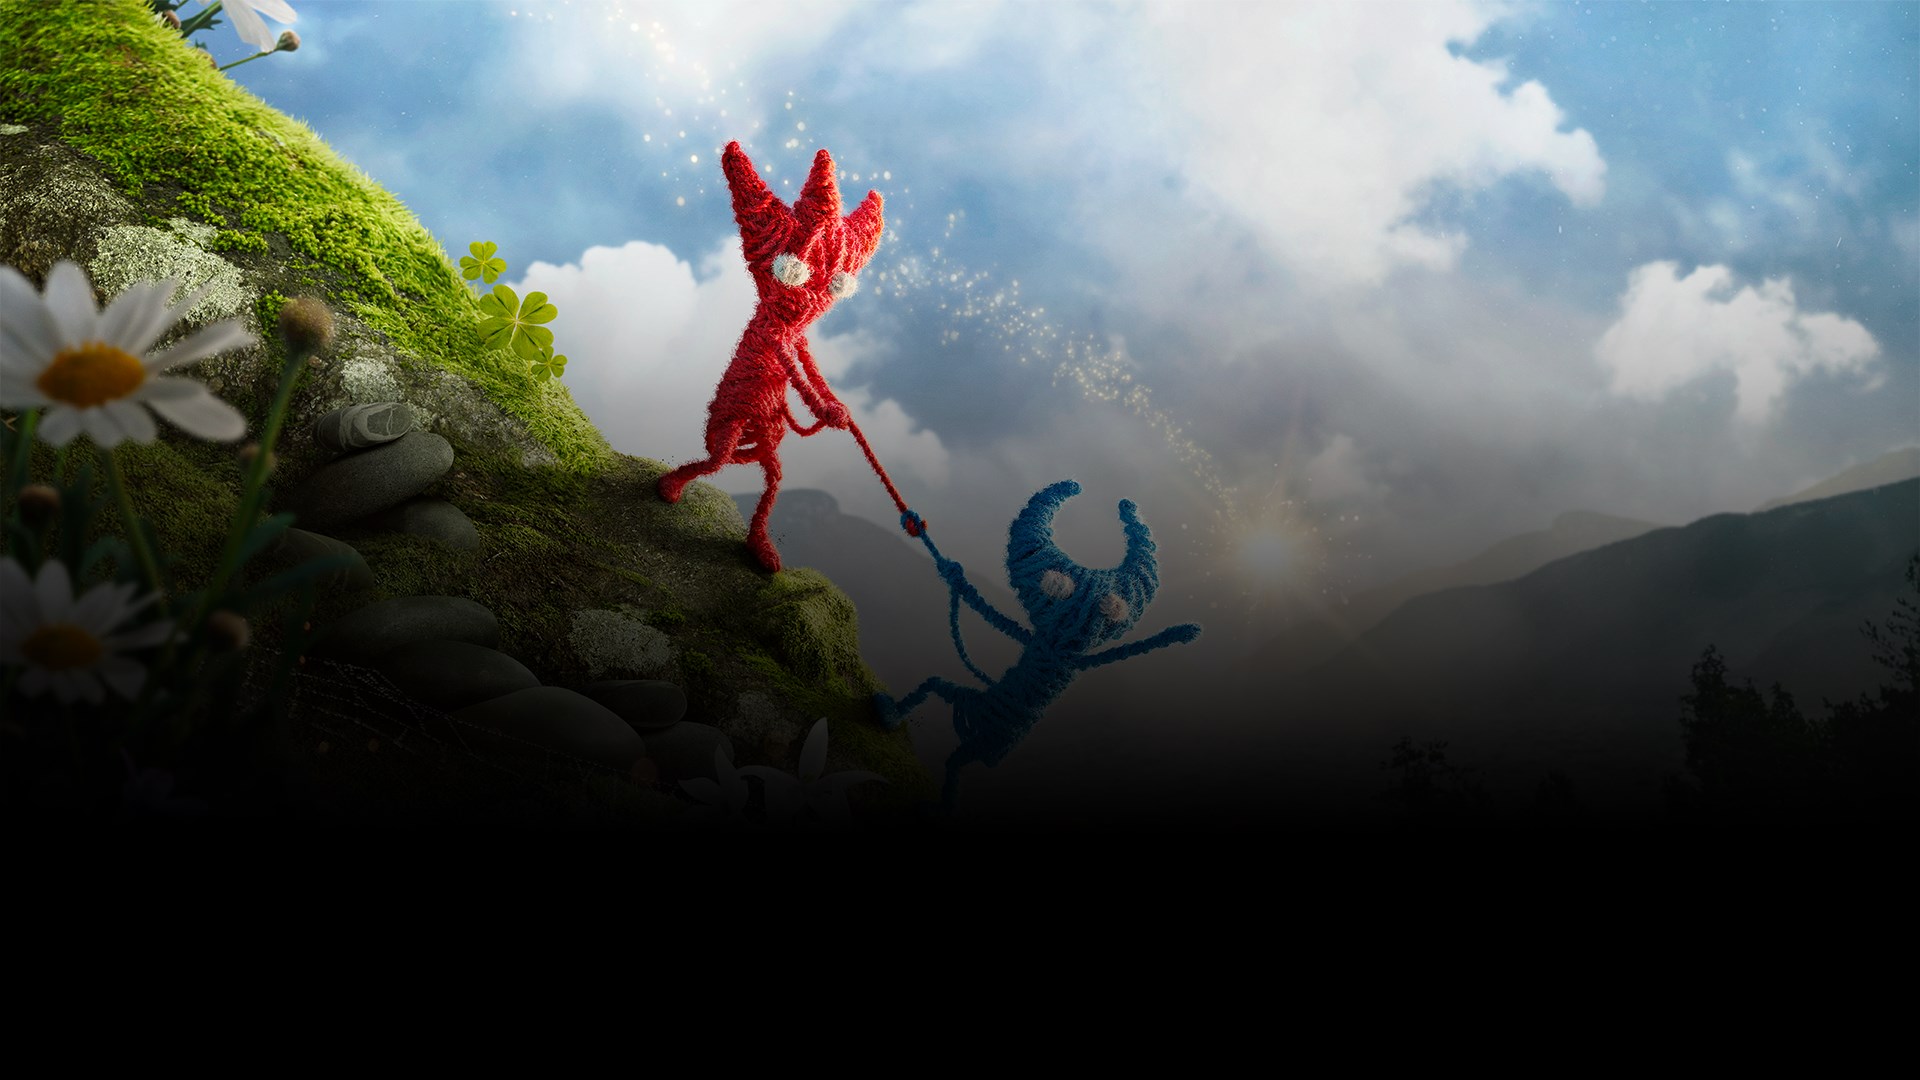 Xbox One users can download a 10 hour trial for Unravel 2